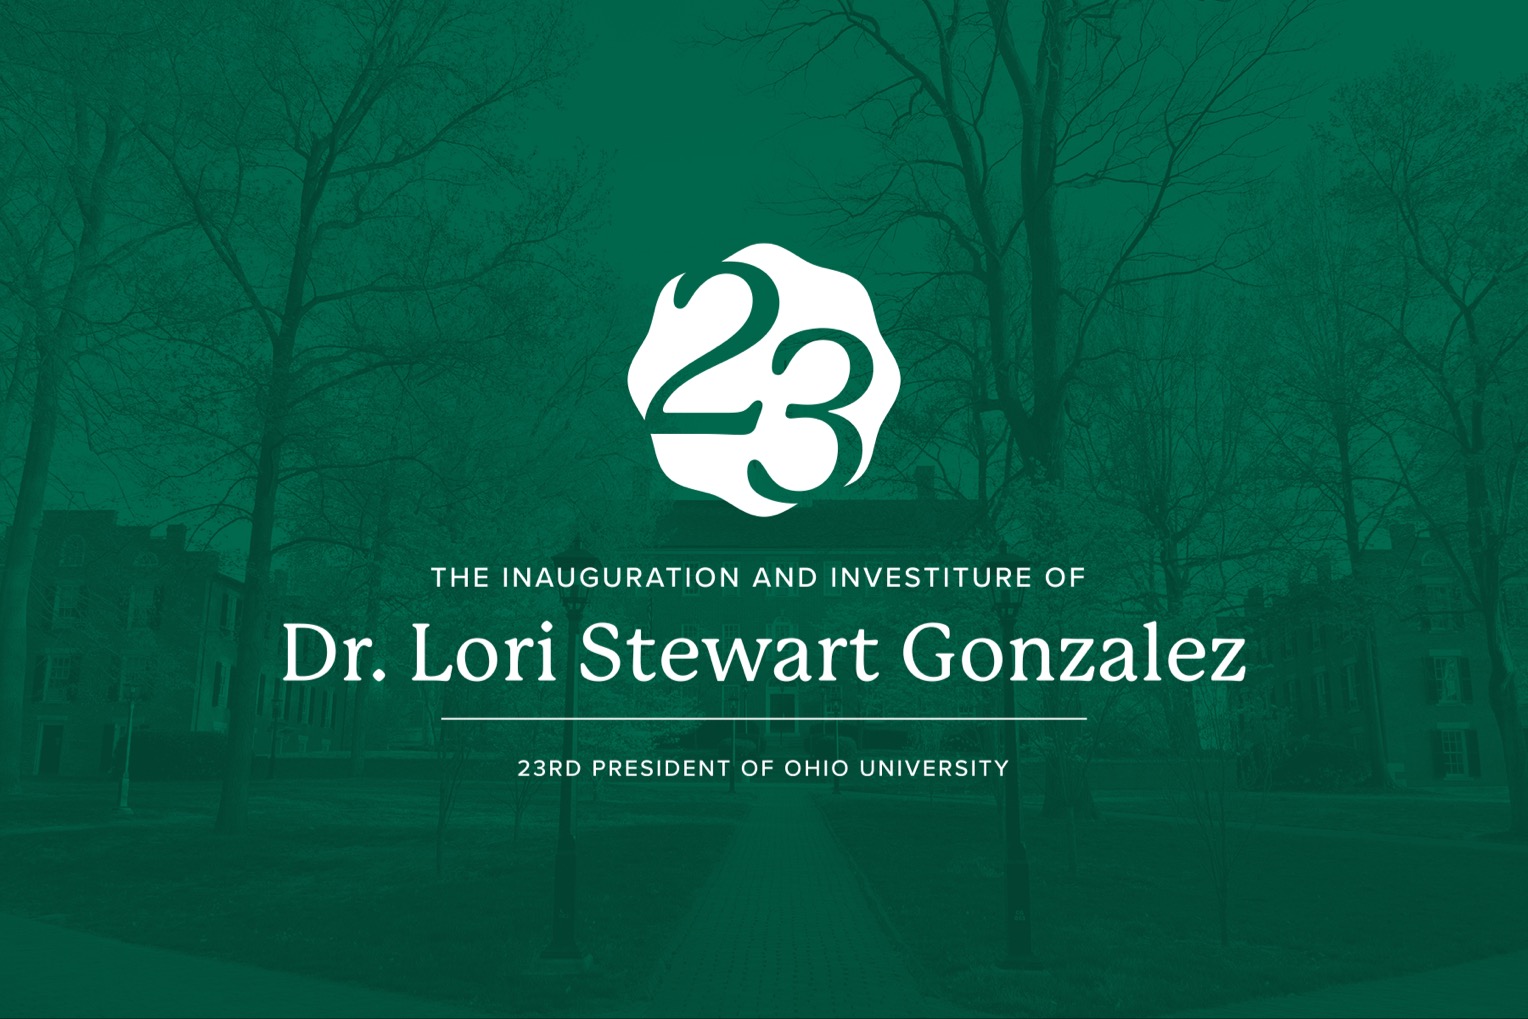 The Inauguration and Investiture of Dr. Lori Stewart Gonzalez - 23rd President of Ohio University